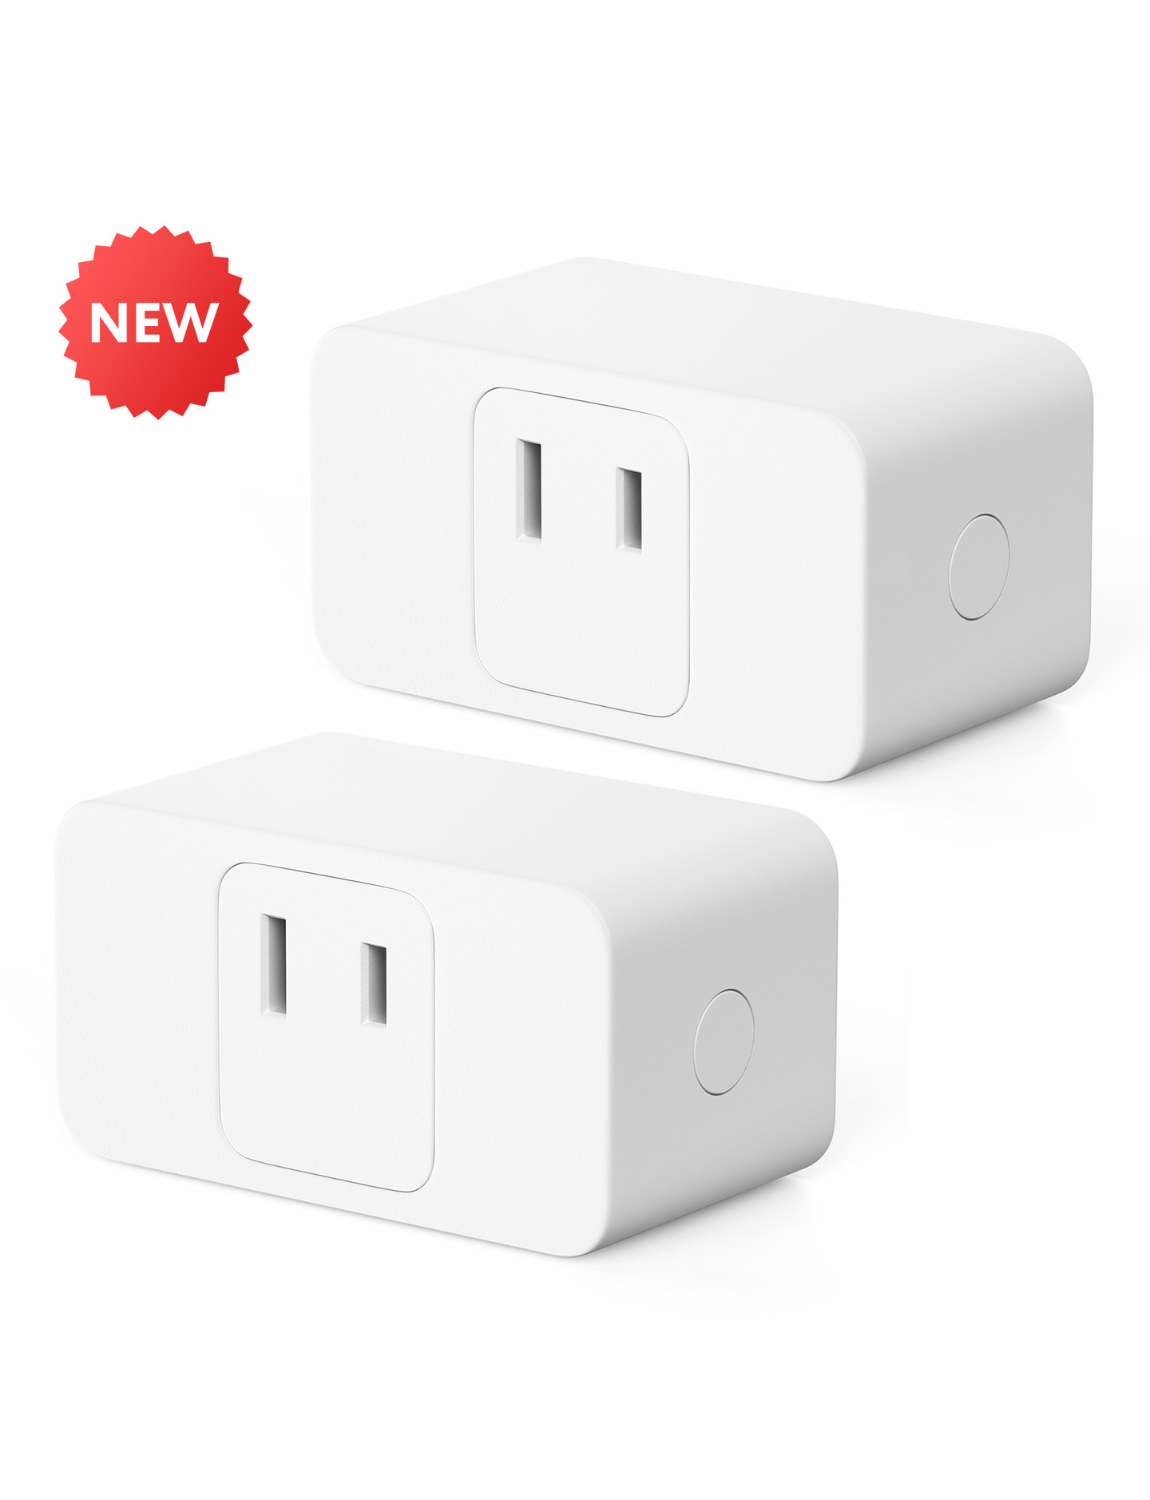 Meross Smart Wi-Fi Plug with Energy Monitor, MSS310, 2 Pack (EU Versio –  Meross Official Store